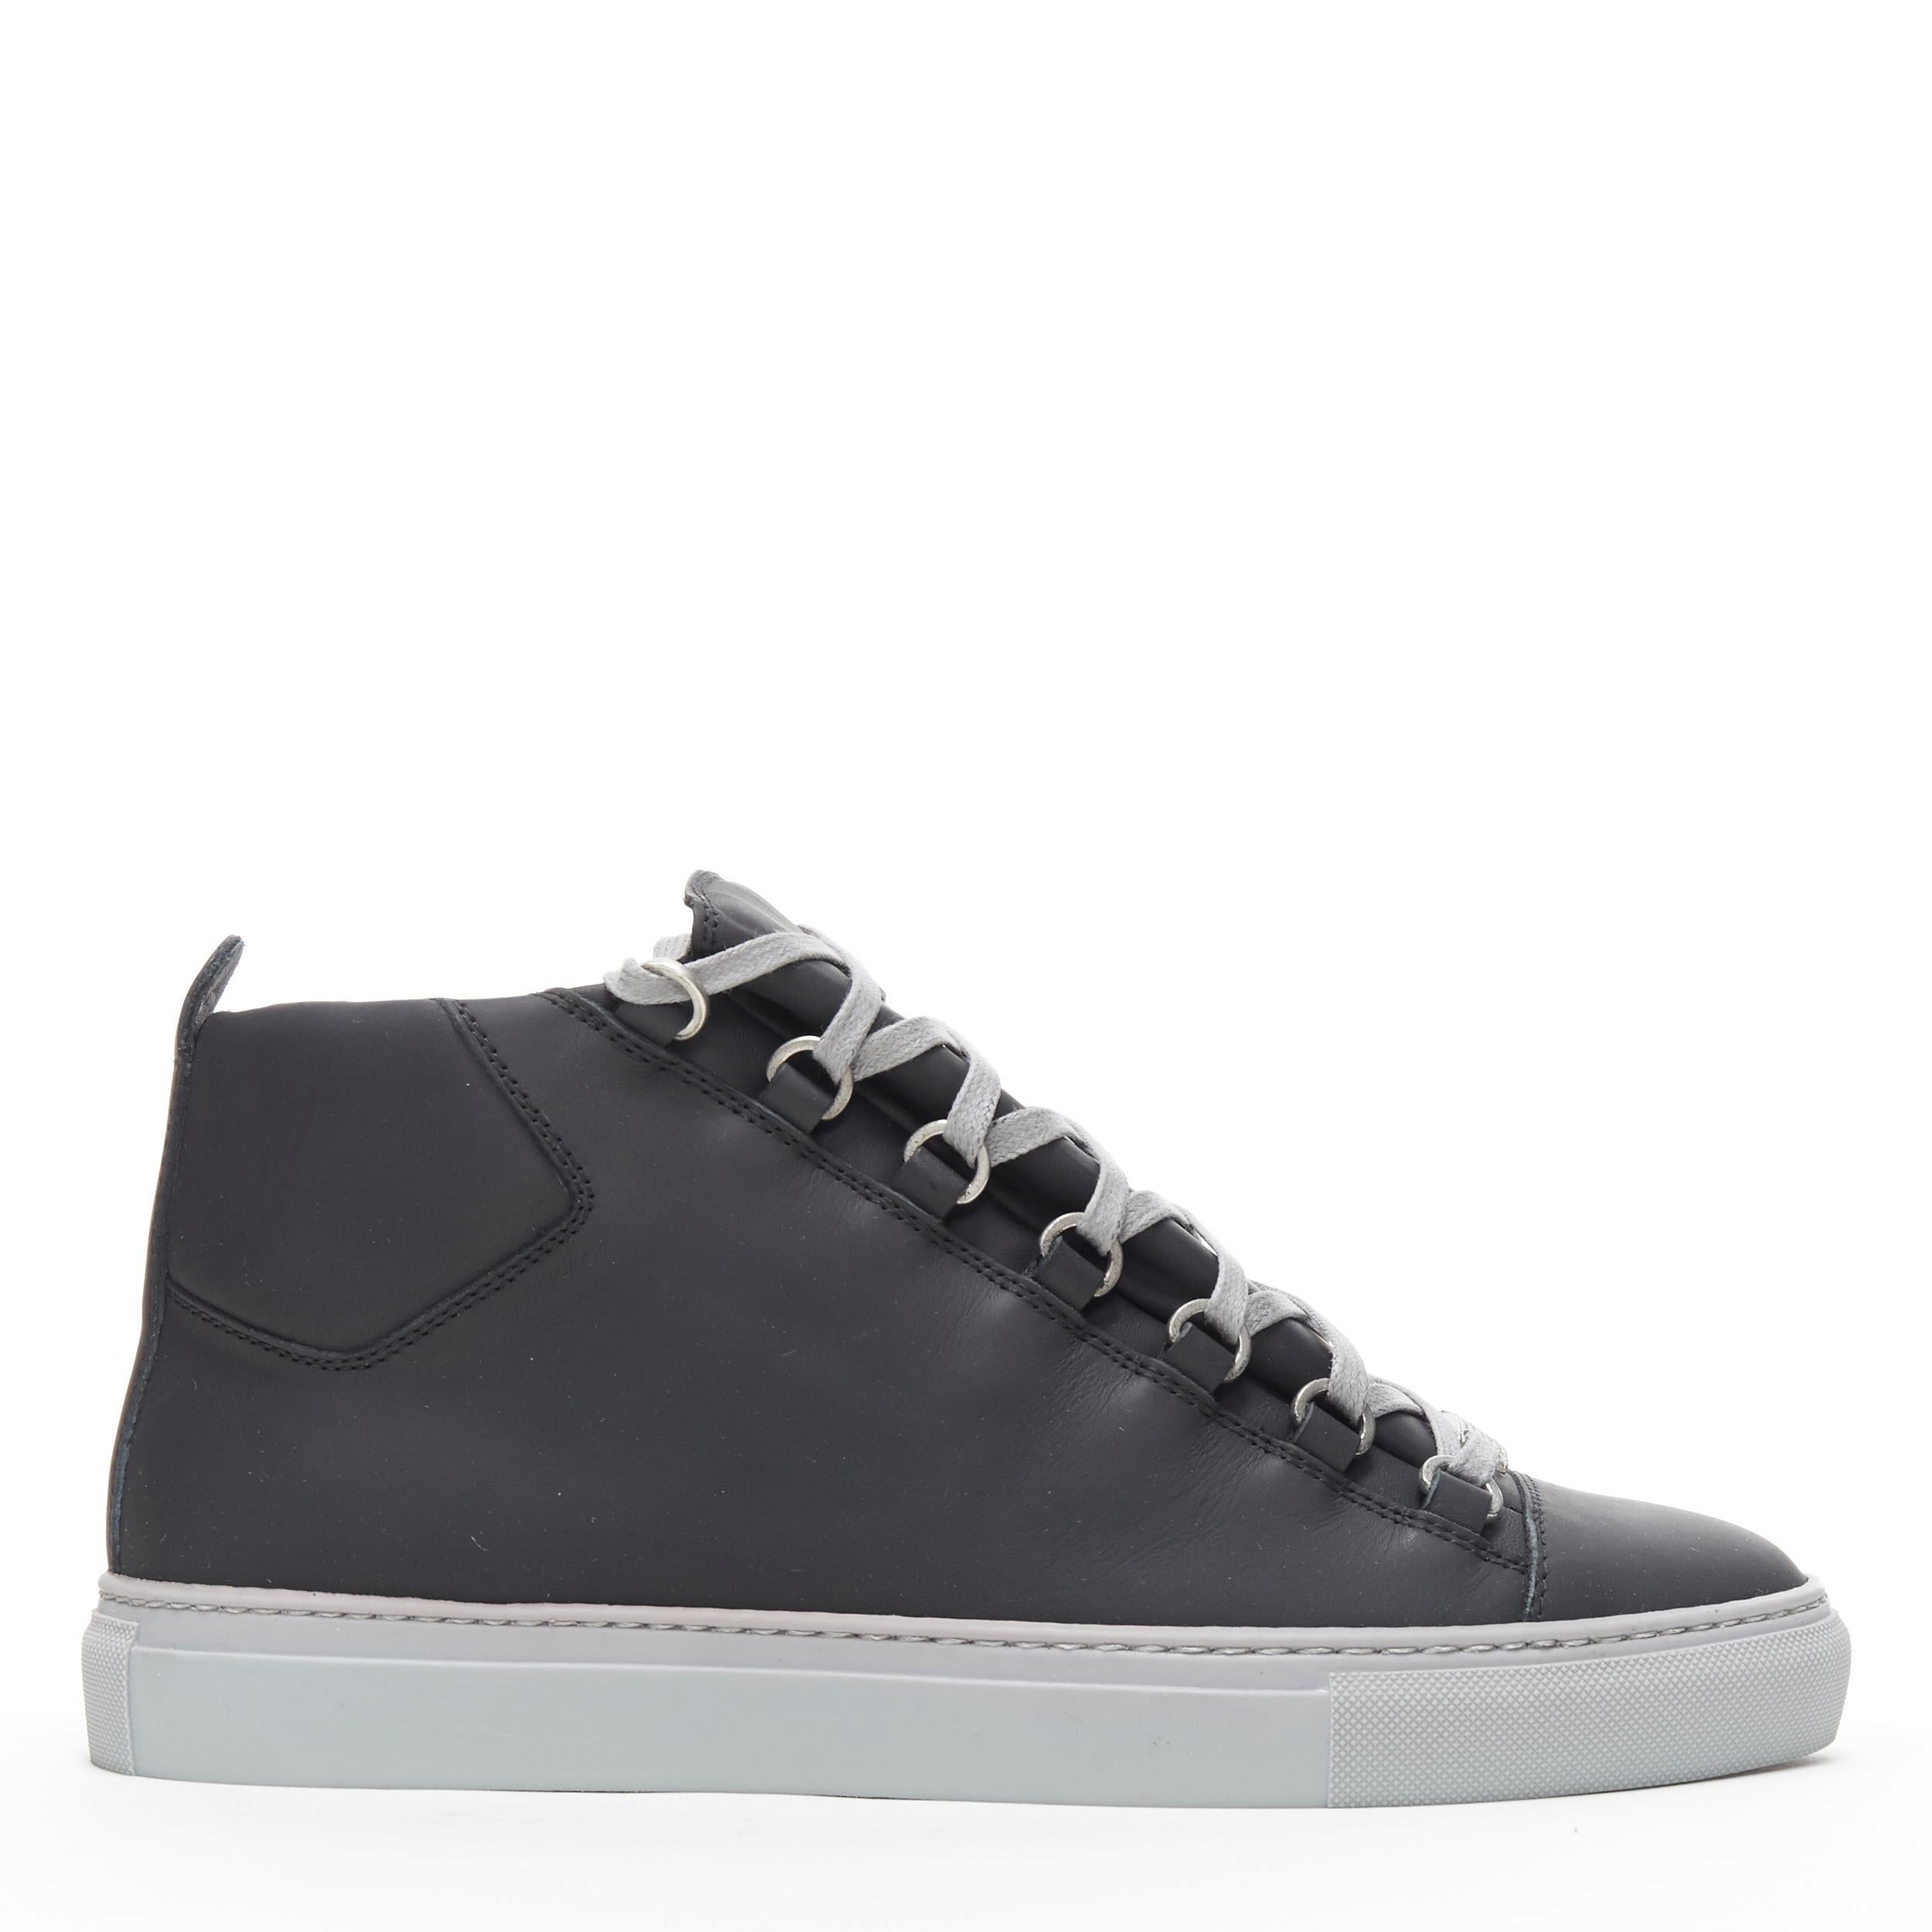 new BALENCIAGA Arena Black Grey high top sneakers EU41 US8 341760 WAWK0 1000
Brand: Balenciaga
Model Name / Style: Balenciaga Arena
Material: Leather
Color: Black, grey
Pattern: Solid
Closure: Lace up
Extra Detail: A classic luxury sneaker style